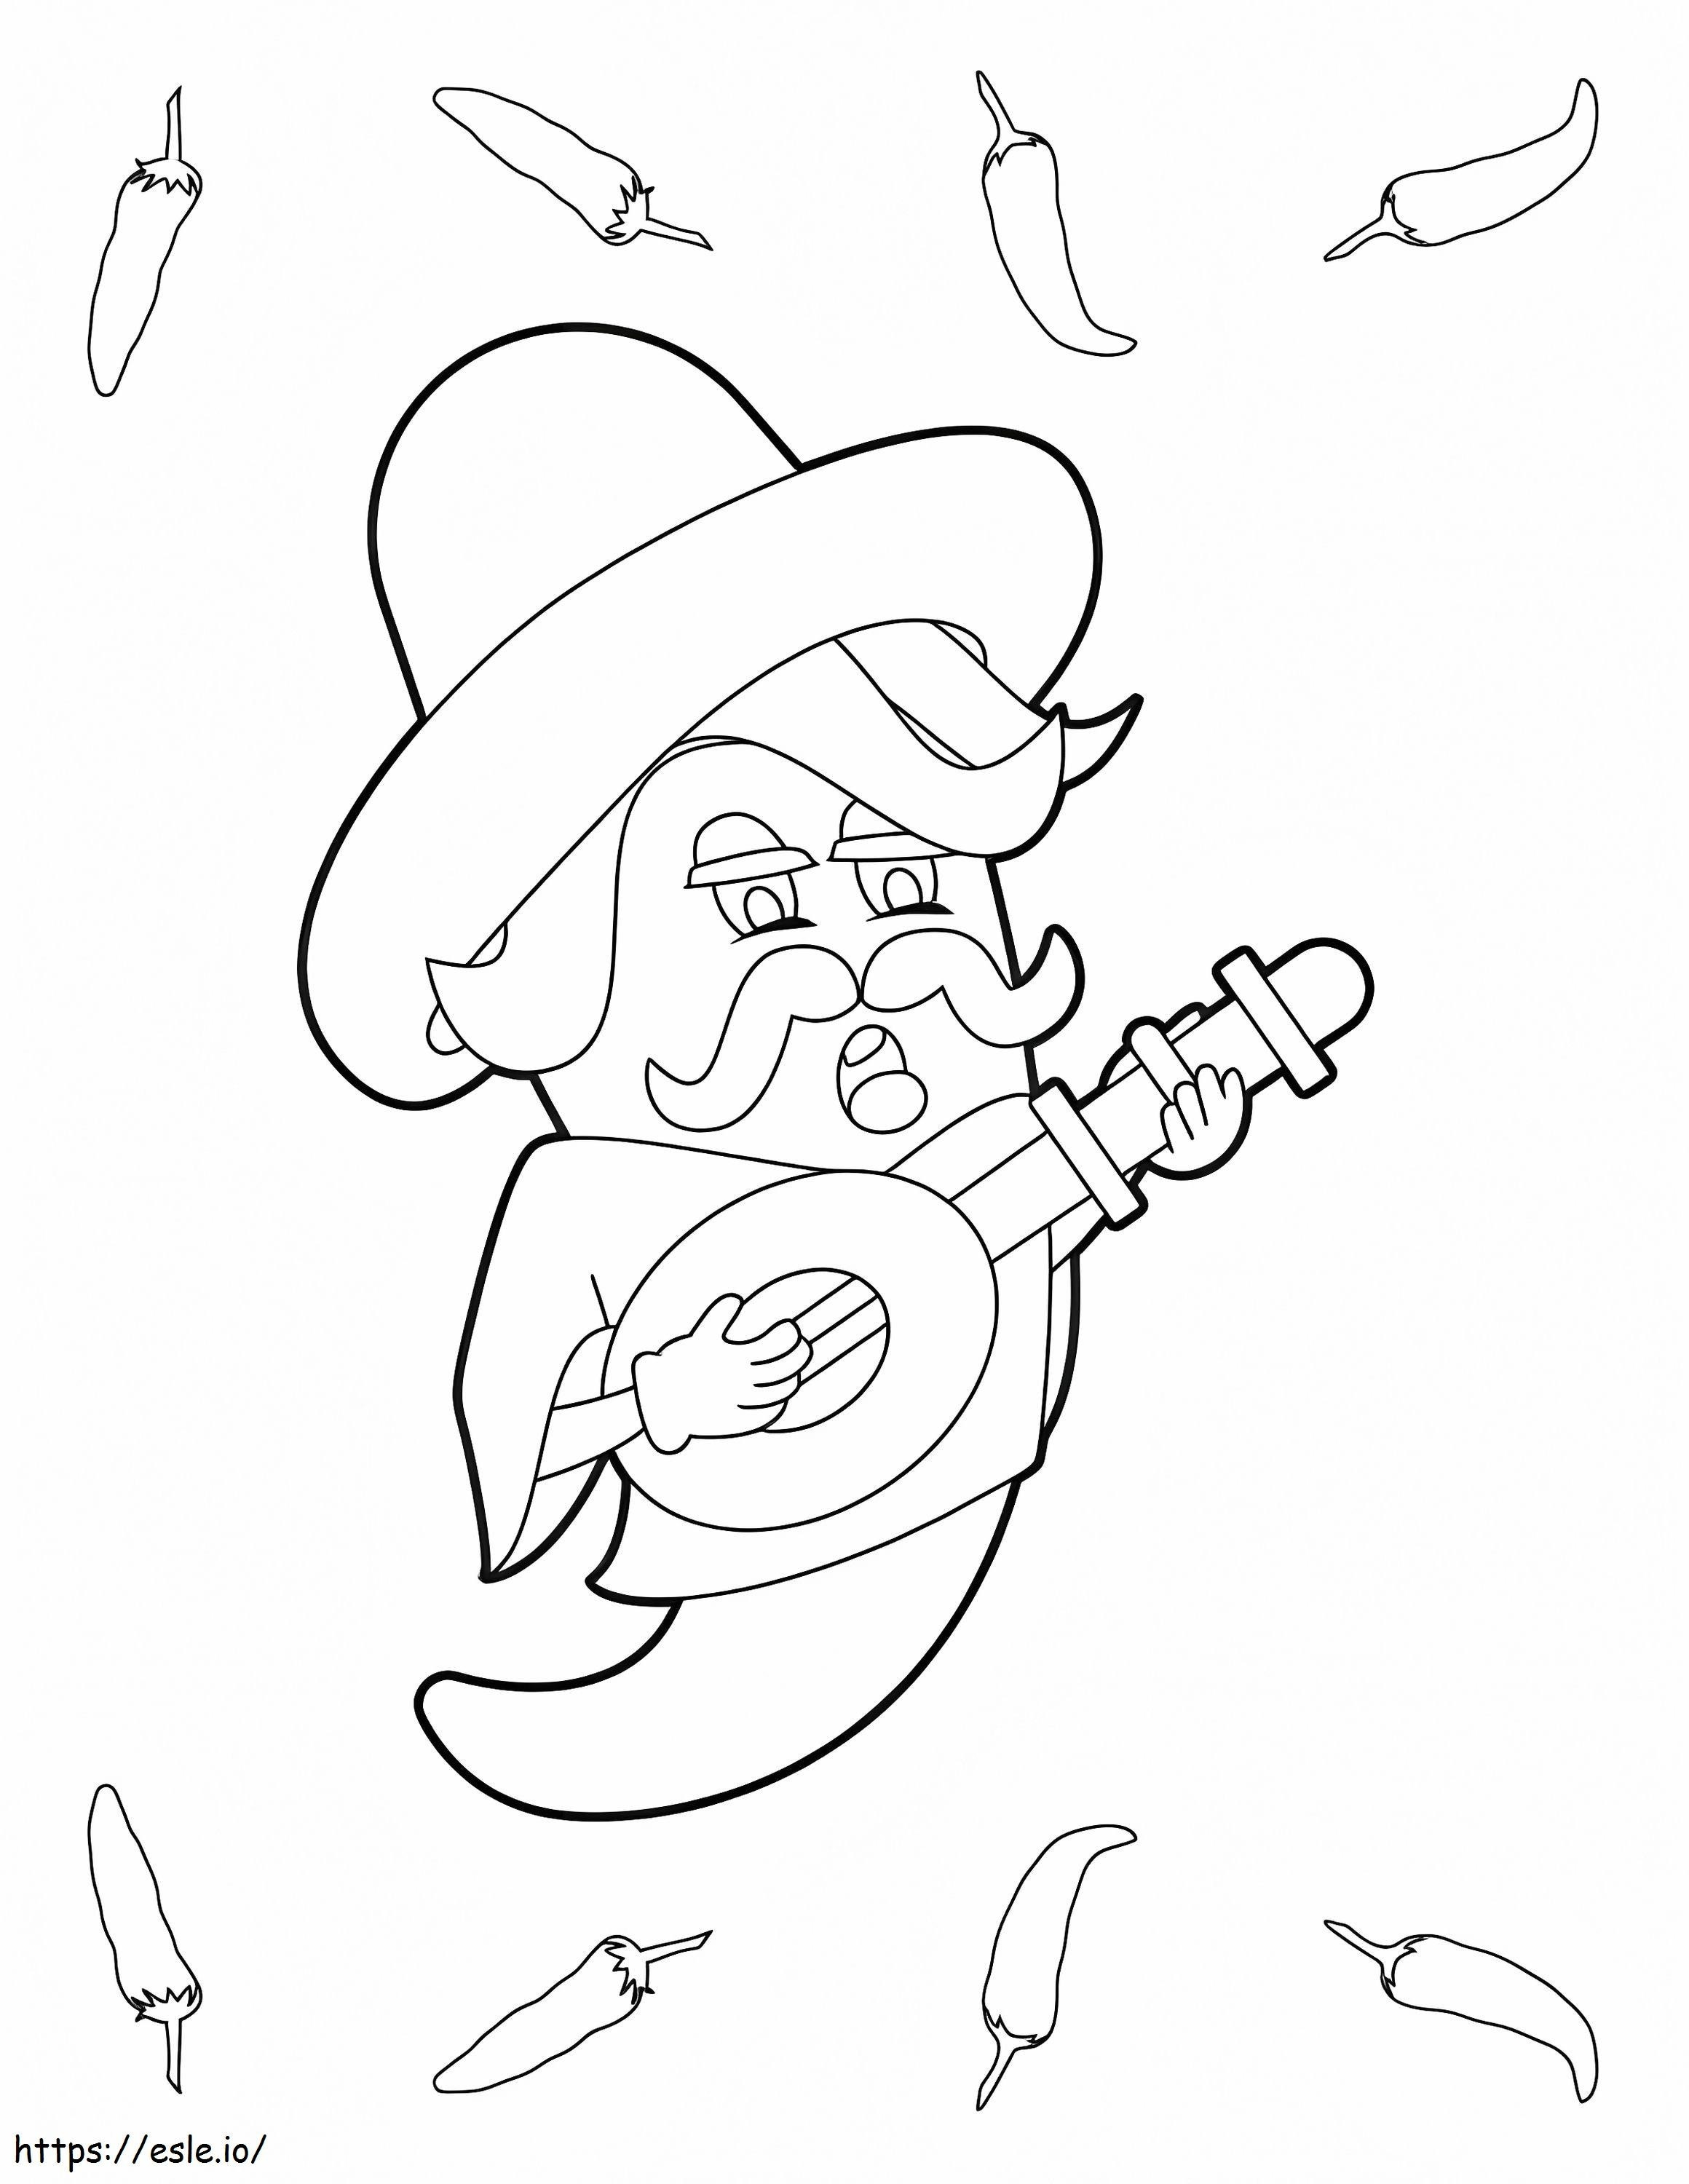 Old Chili Playing Guitar coloring page